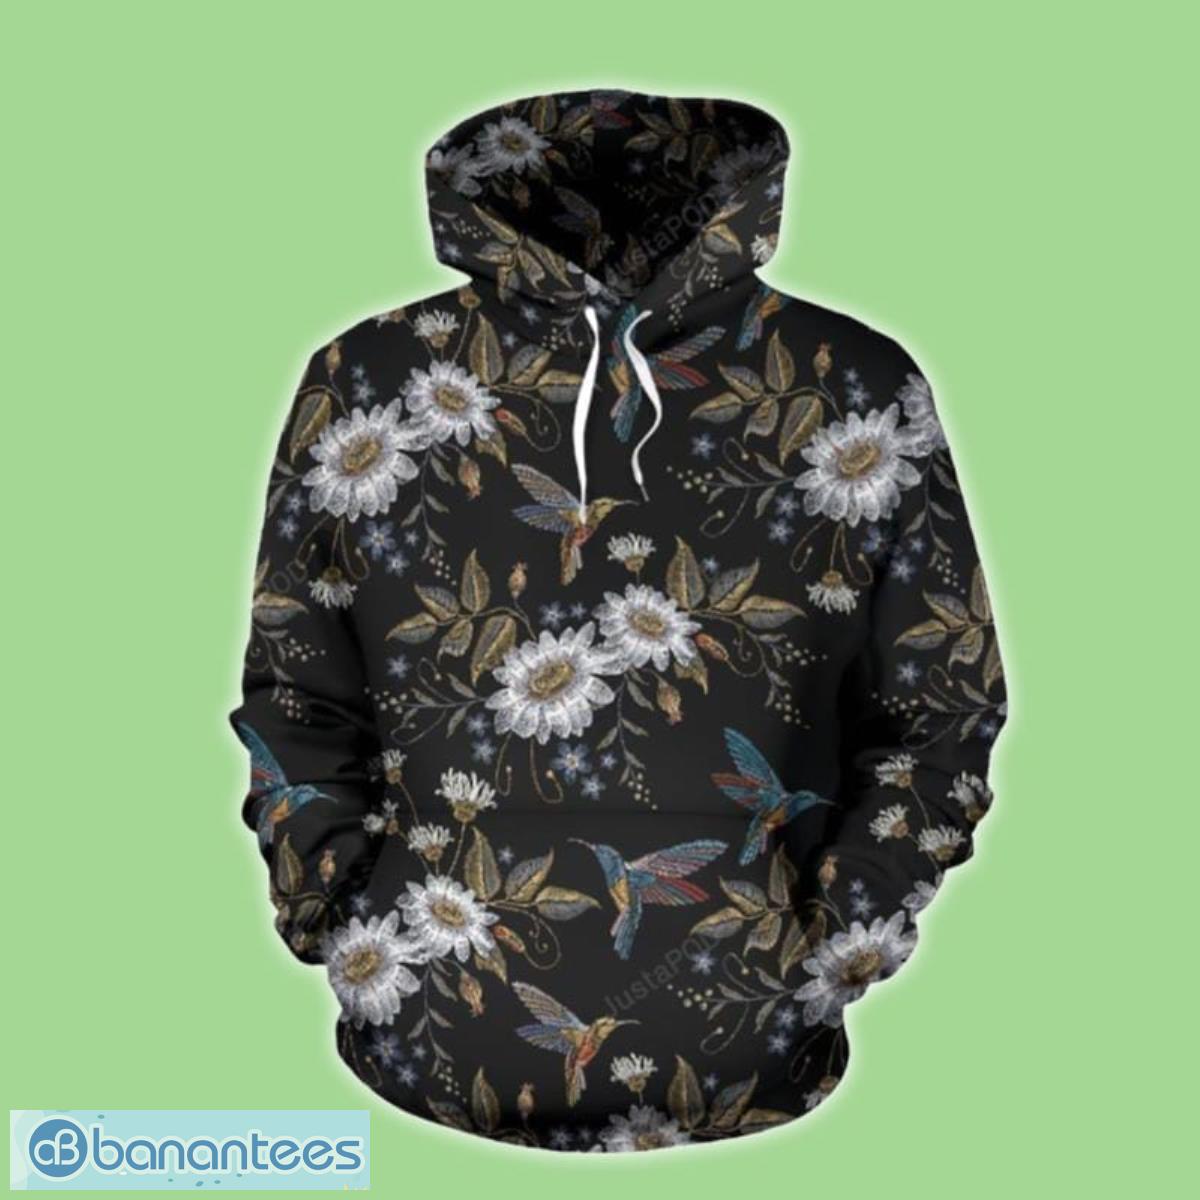 Hummingbird With Embroidery Themed 3D Hoodie Unique Gift For Men And Women  - Banantees